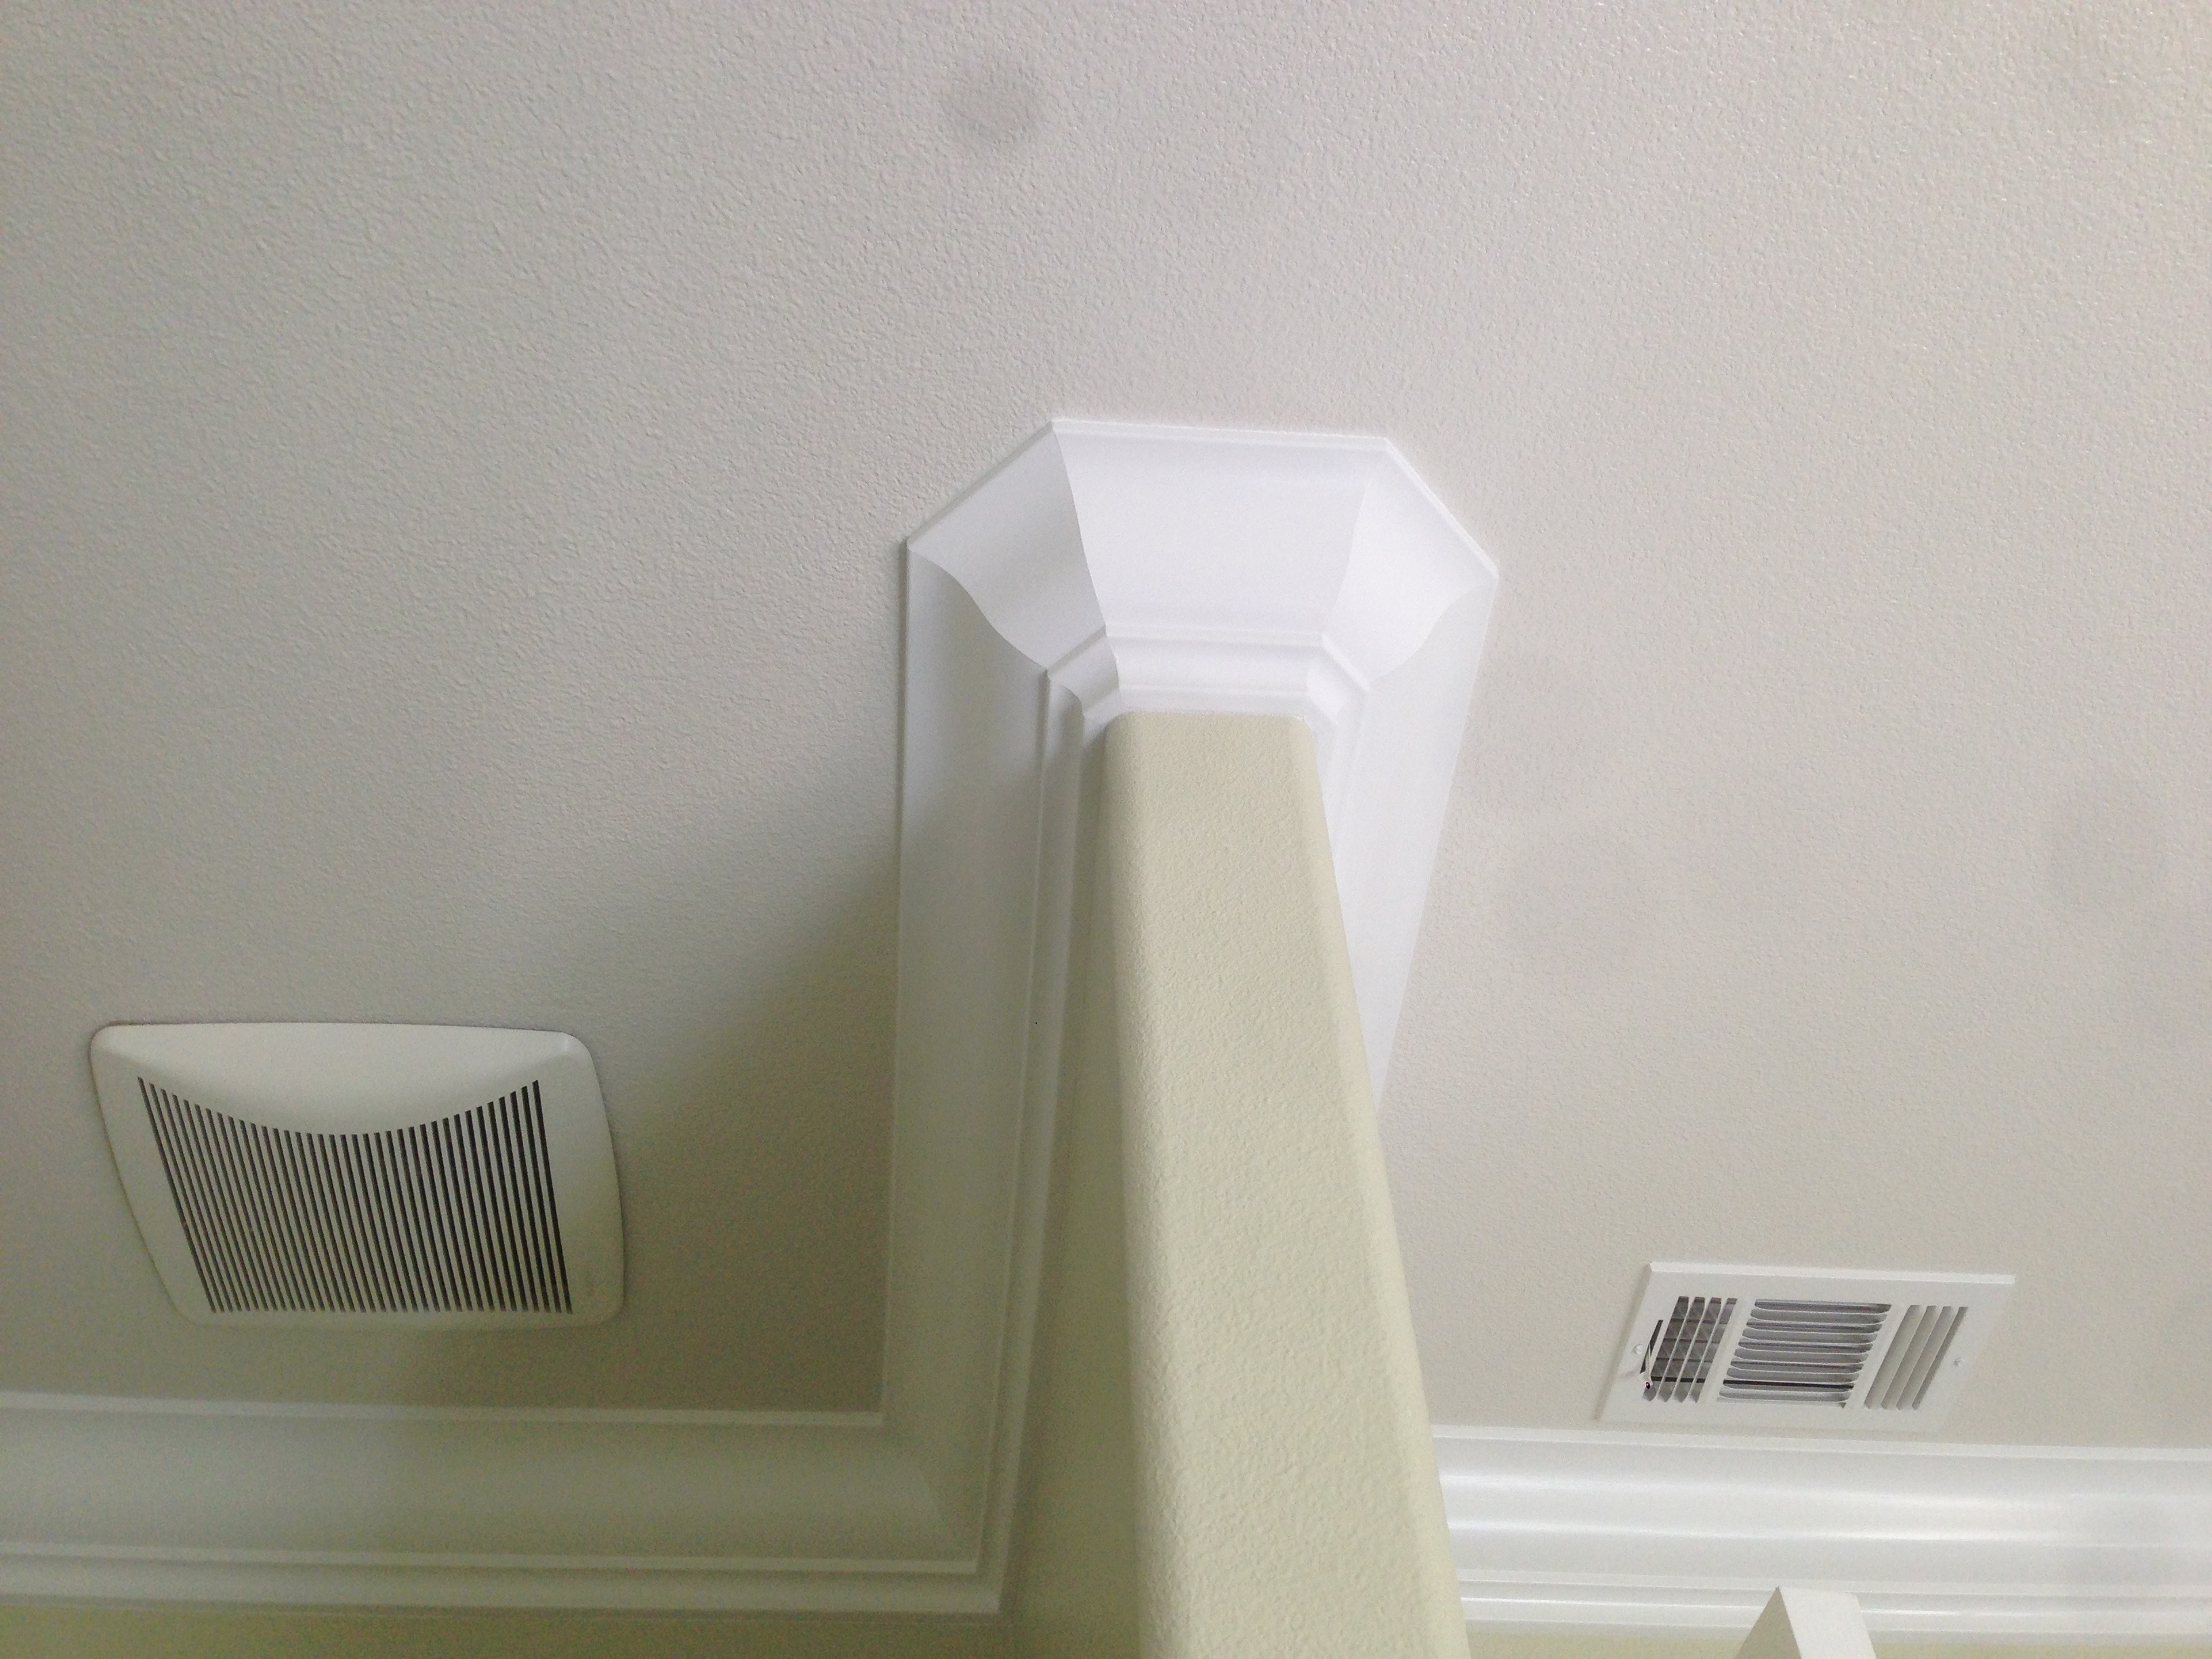 Crown Molding Installation Temecula Ca, How To Put Crown Moulding On Rounded Corners